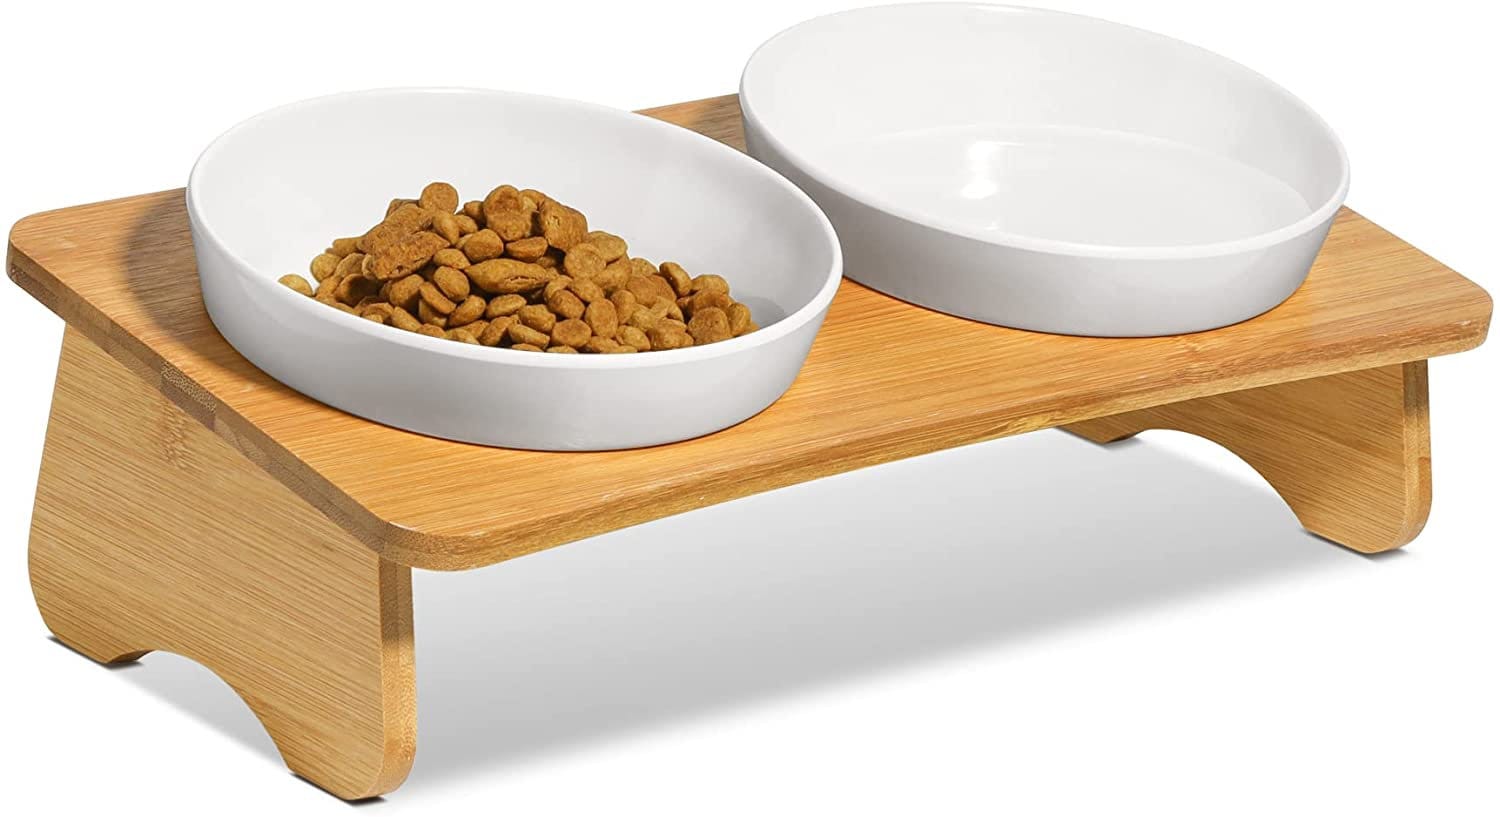 Dog Bowl And Bowl Elevated Cat Bowl, 15 Degree Sloped Ceramic For Small Dogs  With Iron Stand, 2-in-1 Elevated Food And Water Bowls For Dogs, Neck Reli